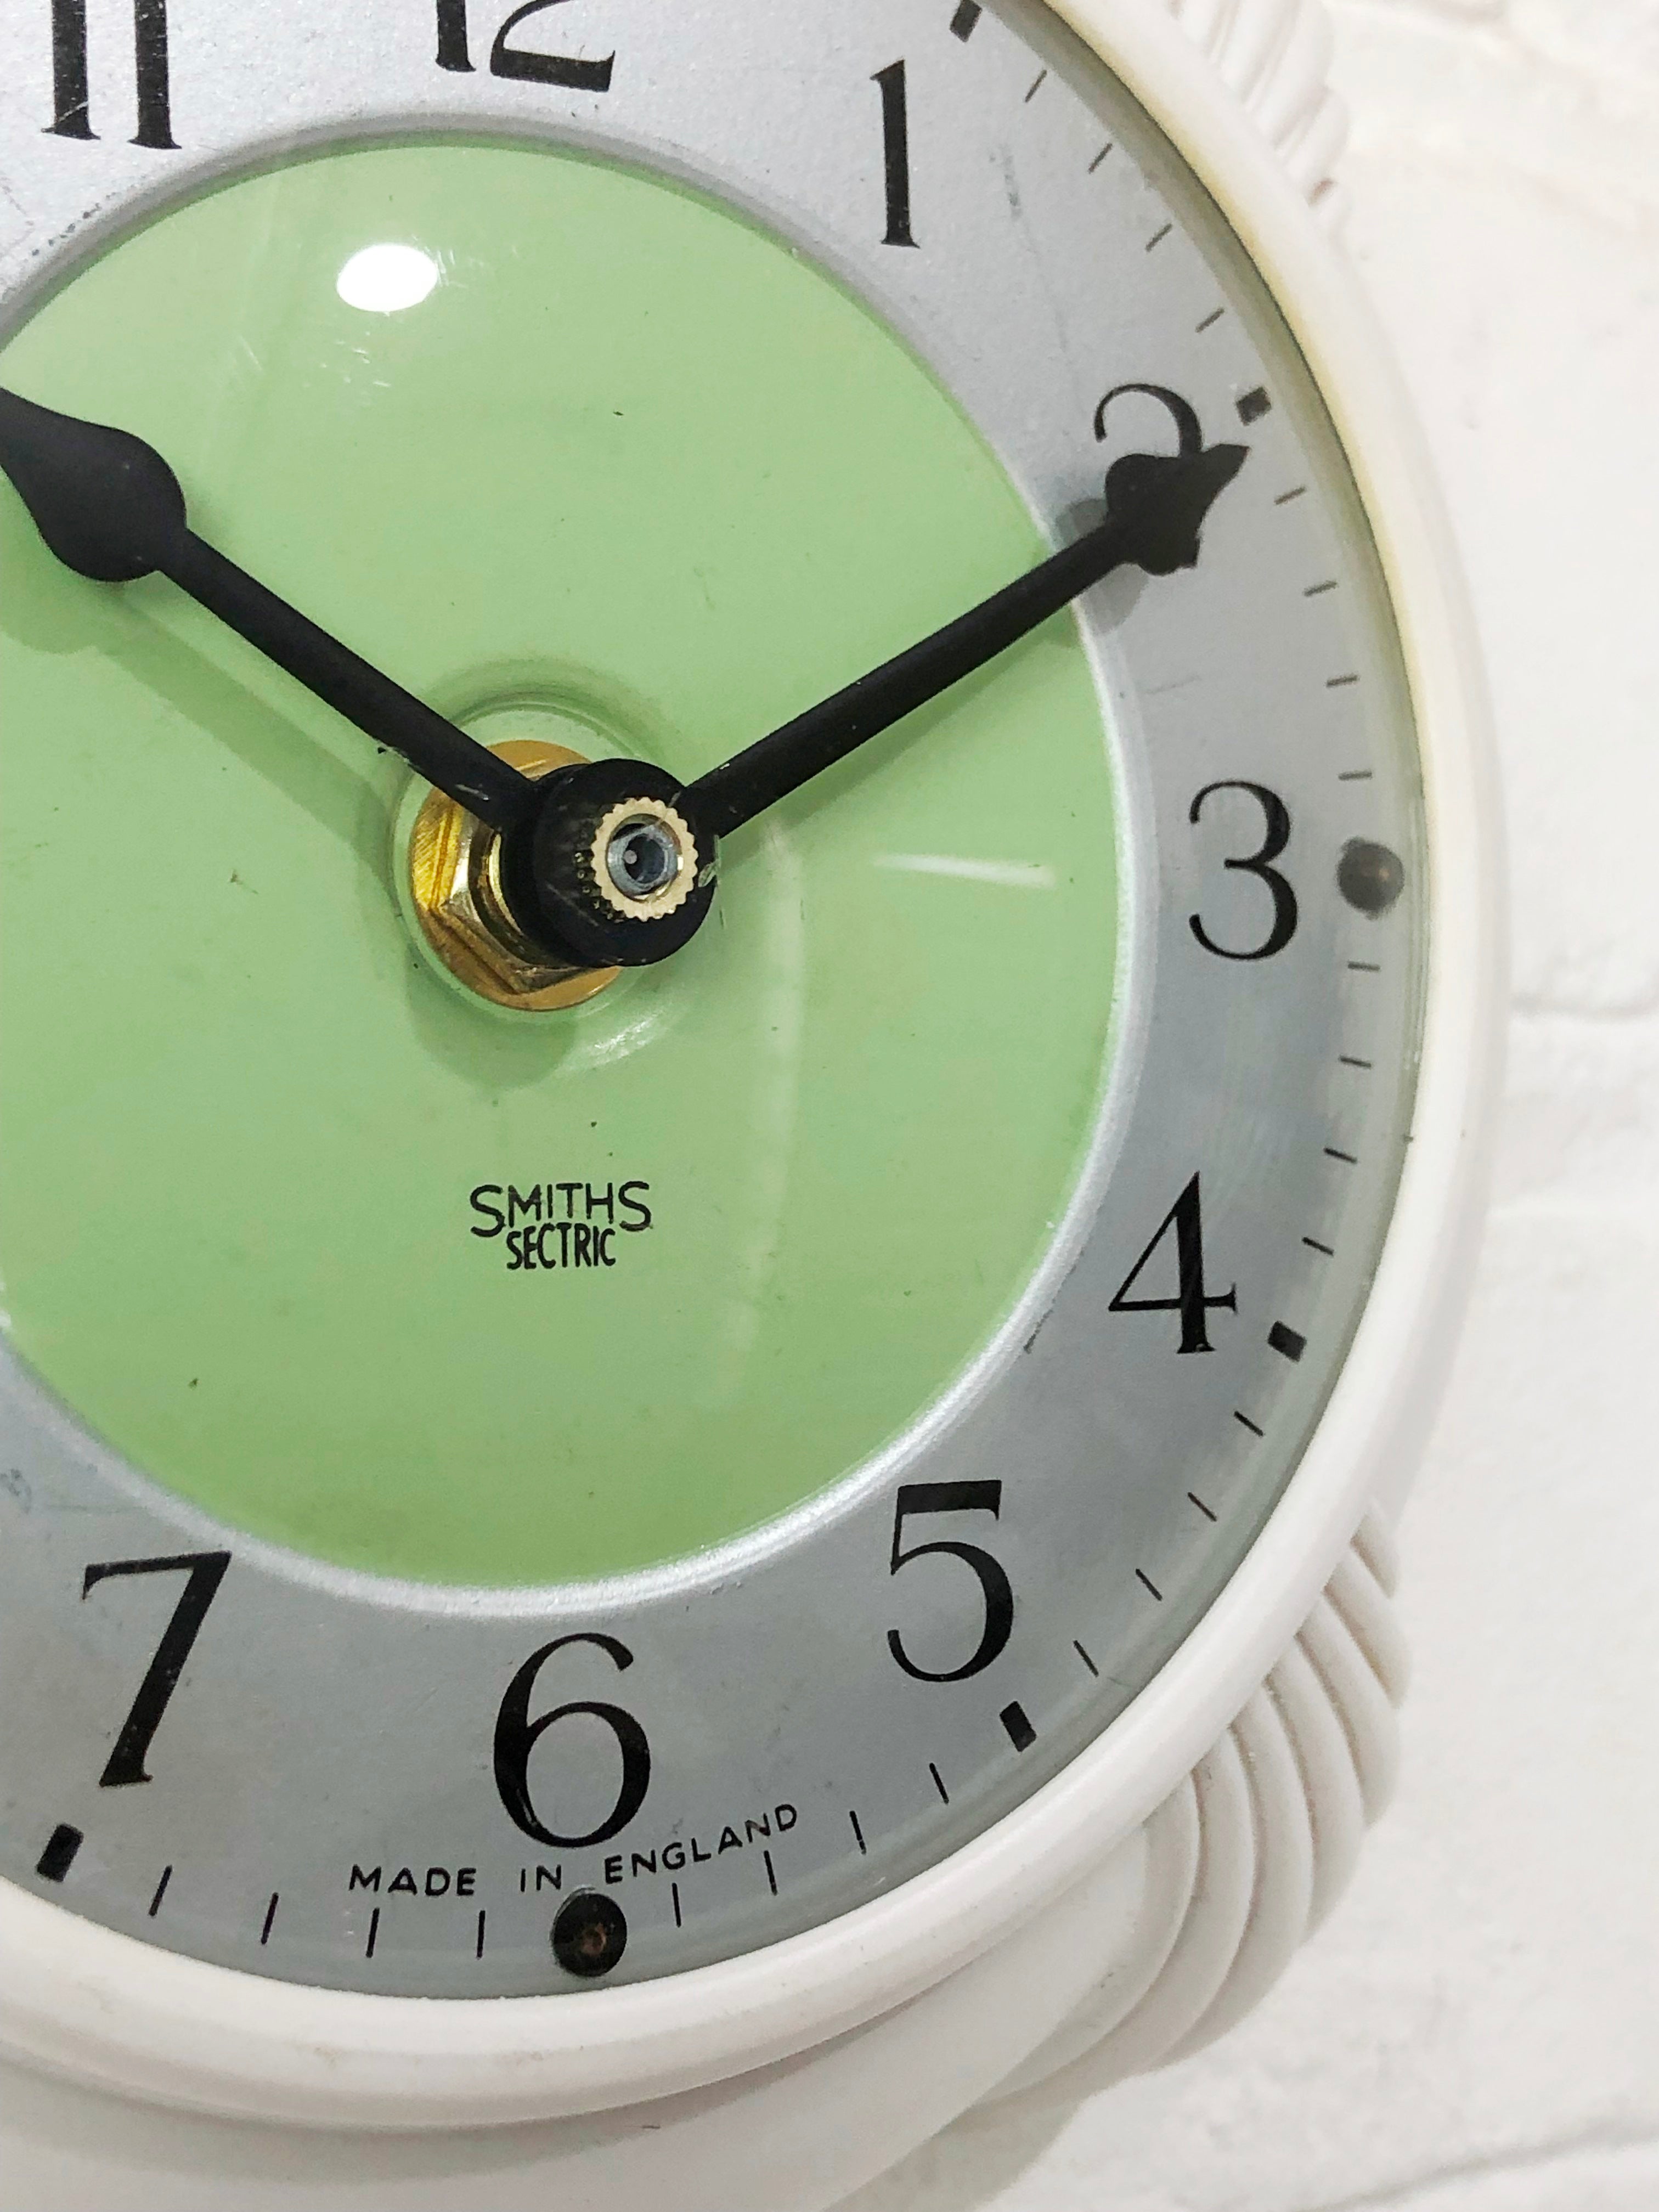 Original Smiths Sectric Clamshell Bakelite Kitchen Wall Clock | eXibit collection